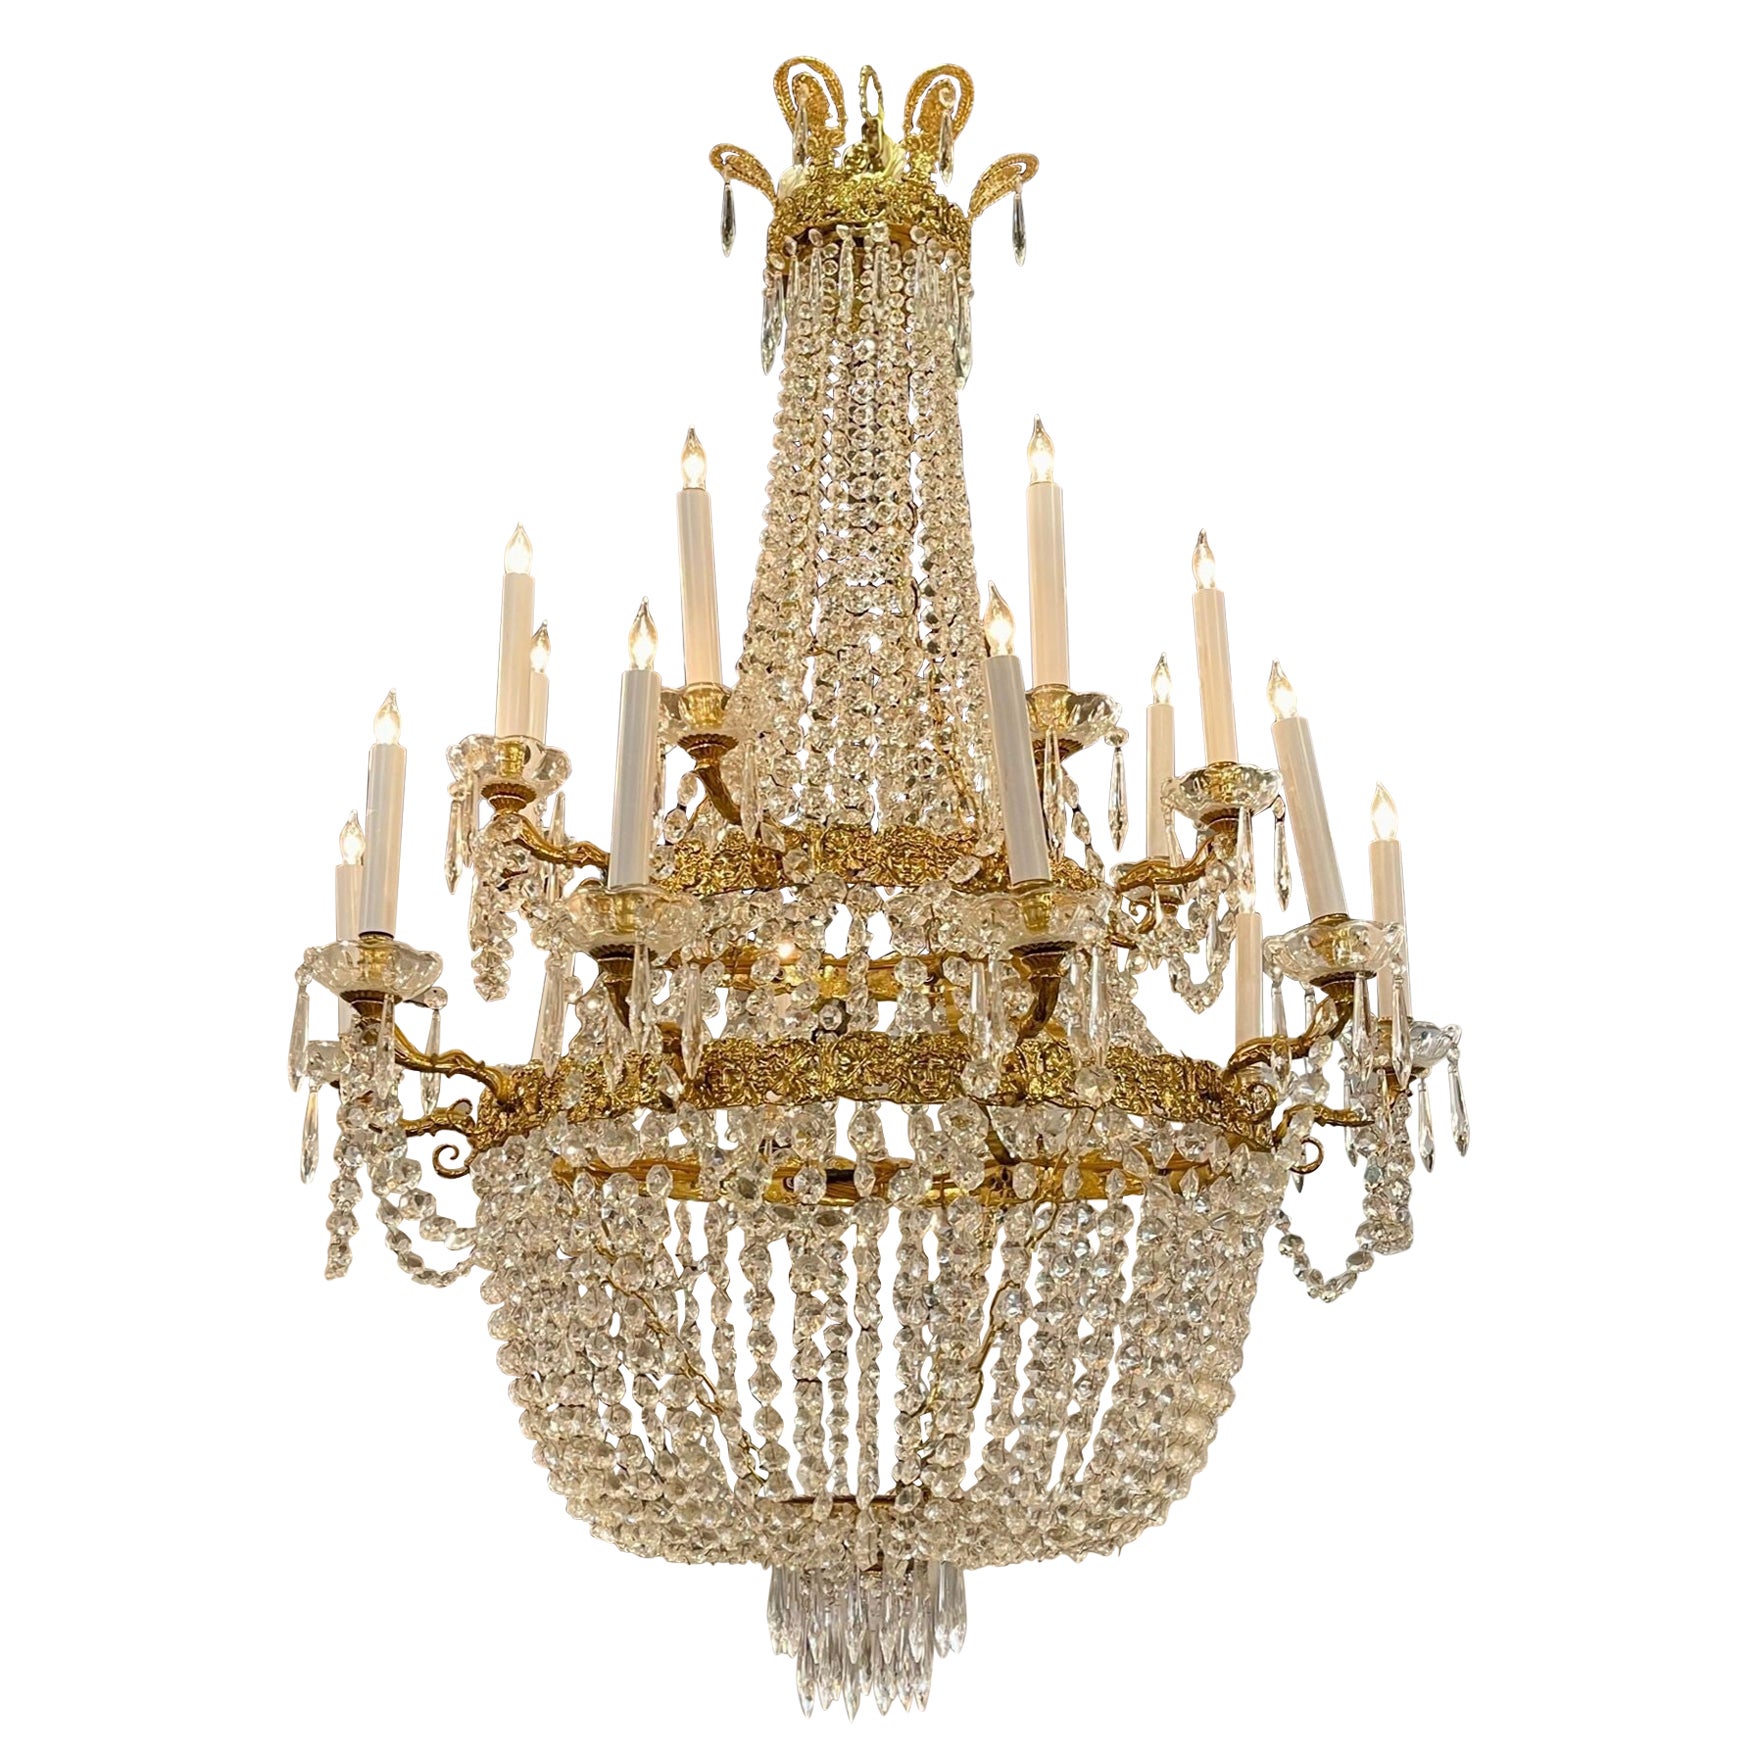 French Empire Style Gilt Brass and Crystal Basket Chandelier with 18 Lights